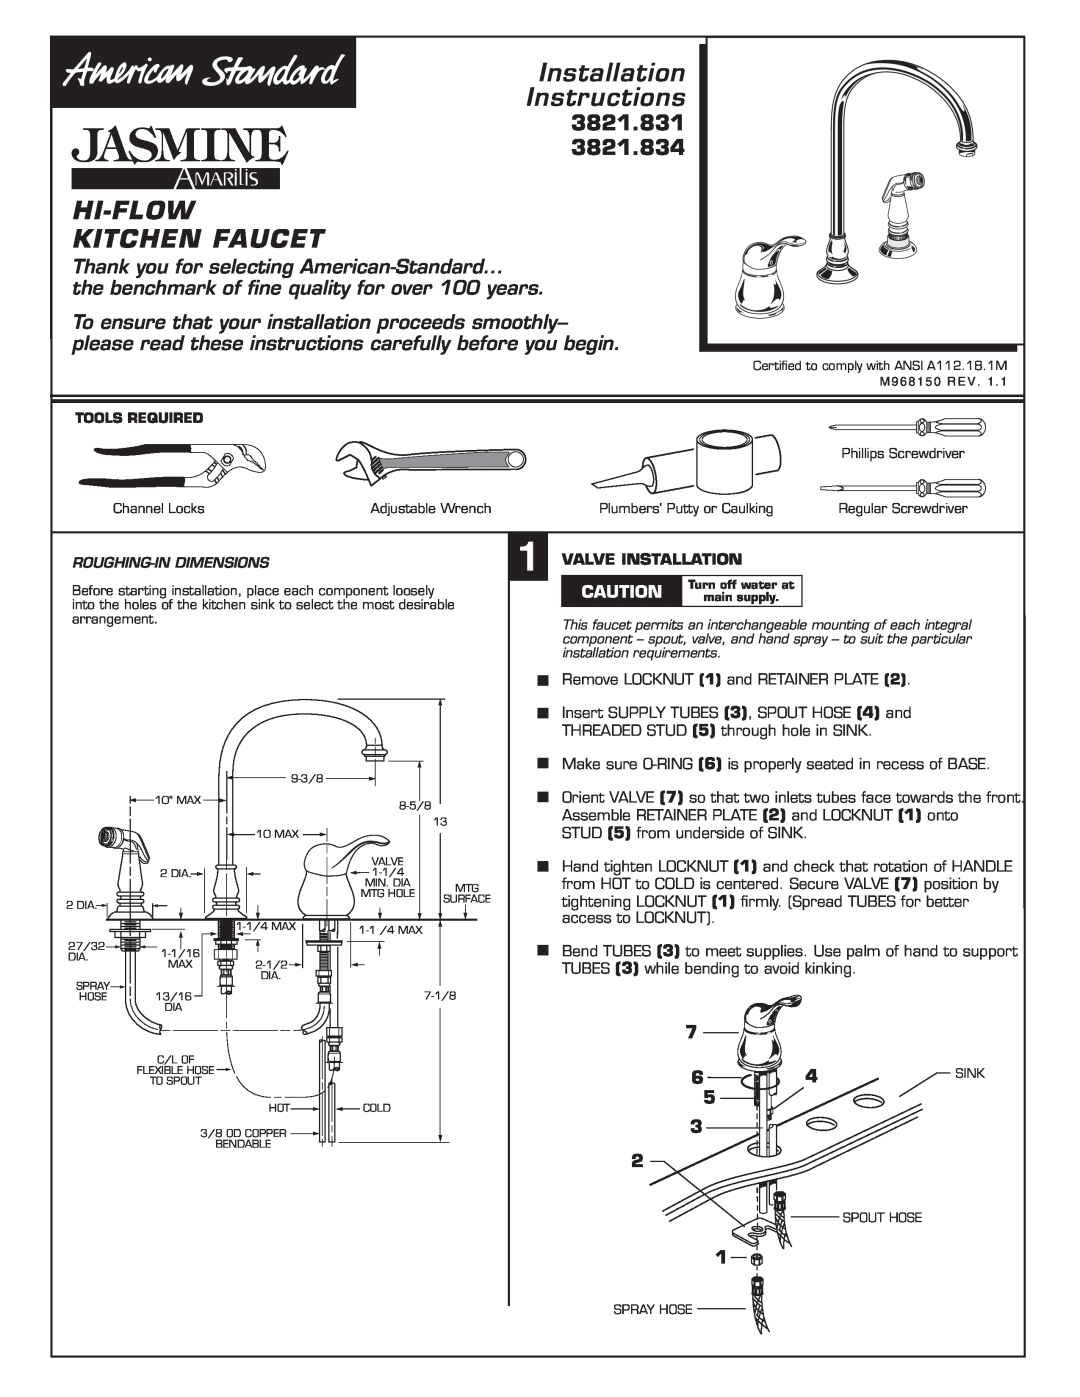 American Standard 3821.834 installation instructions Valve Installation, Installation Instructions, Hi-Flow Kitchen Faucet 